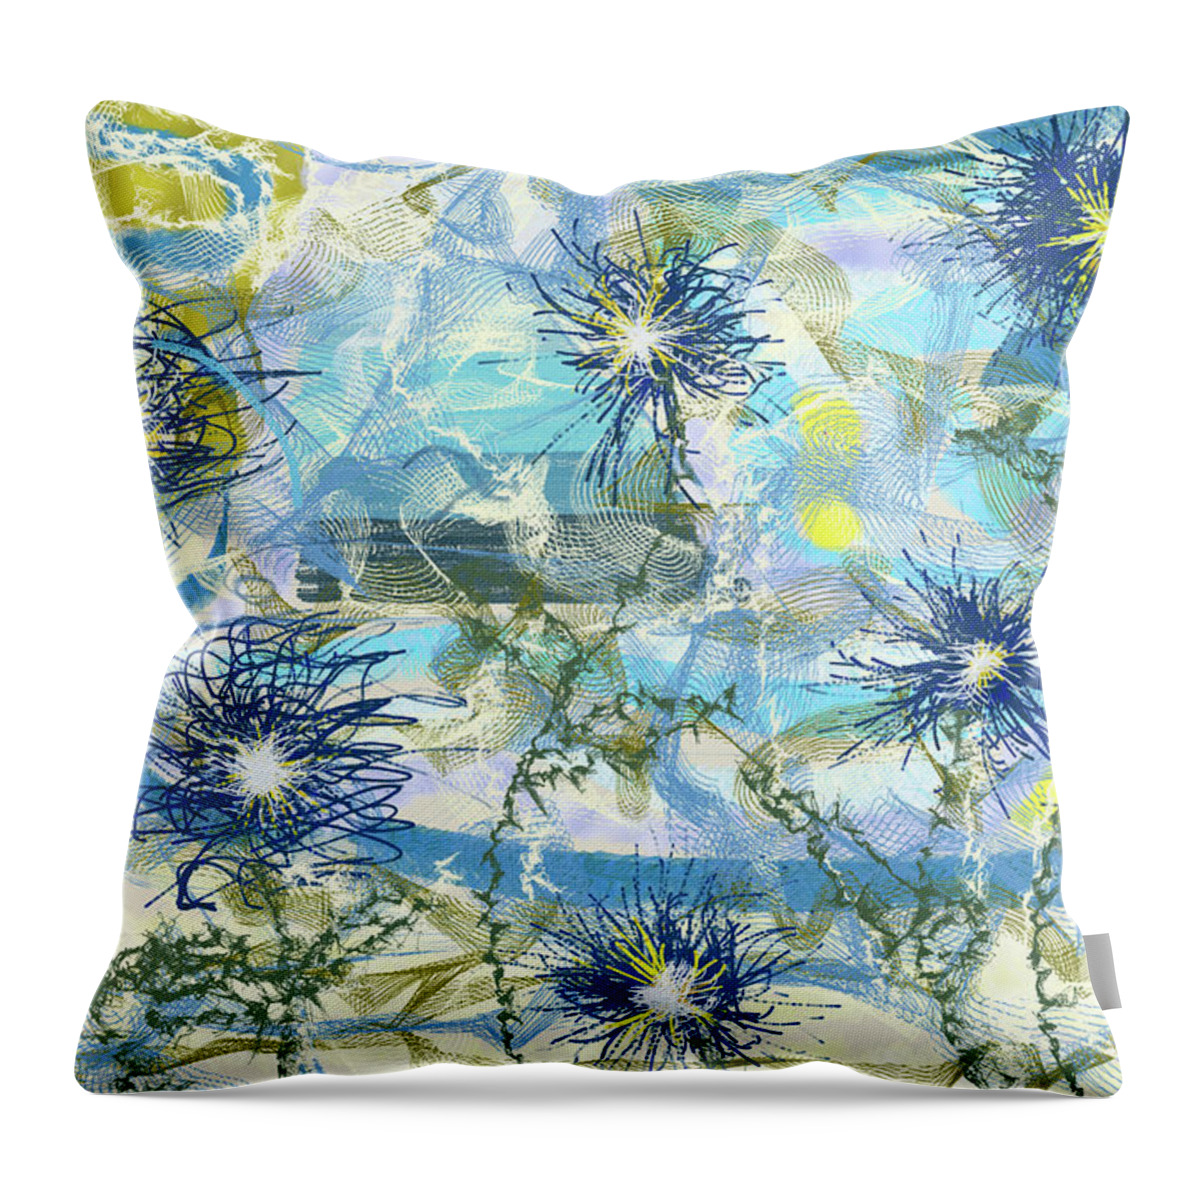 Digital Throw Pillow featuring the painting Flower Garden #8 by Christina Wedberg